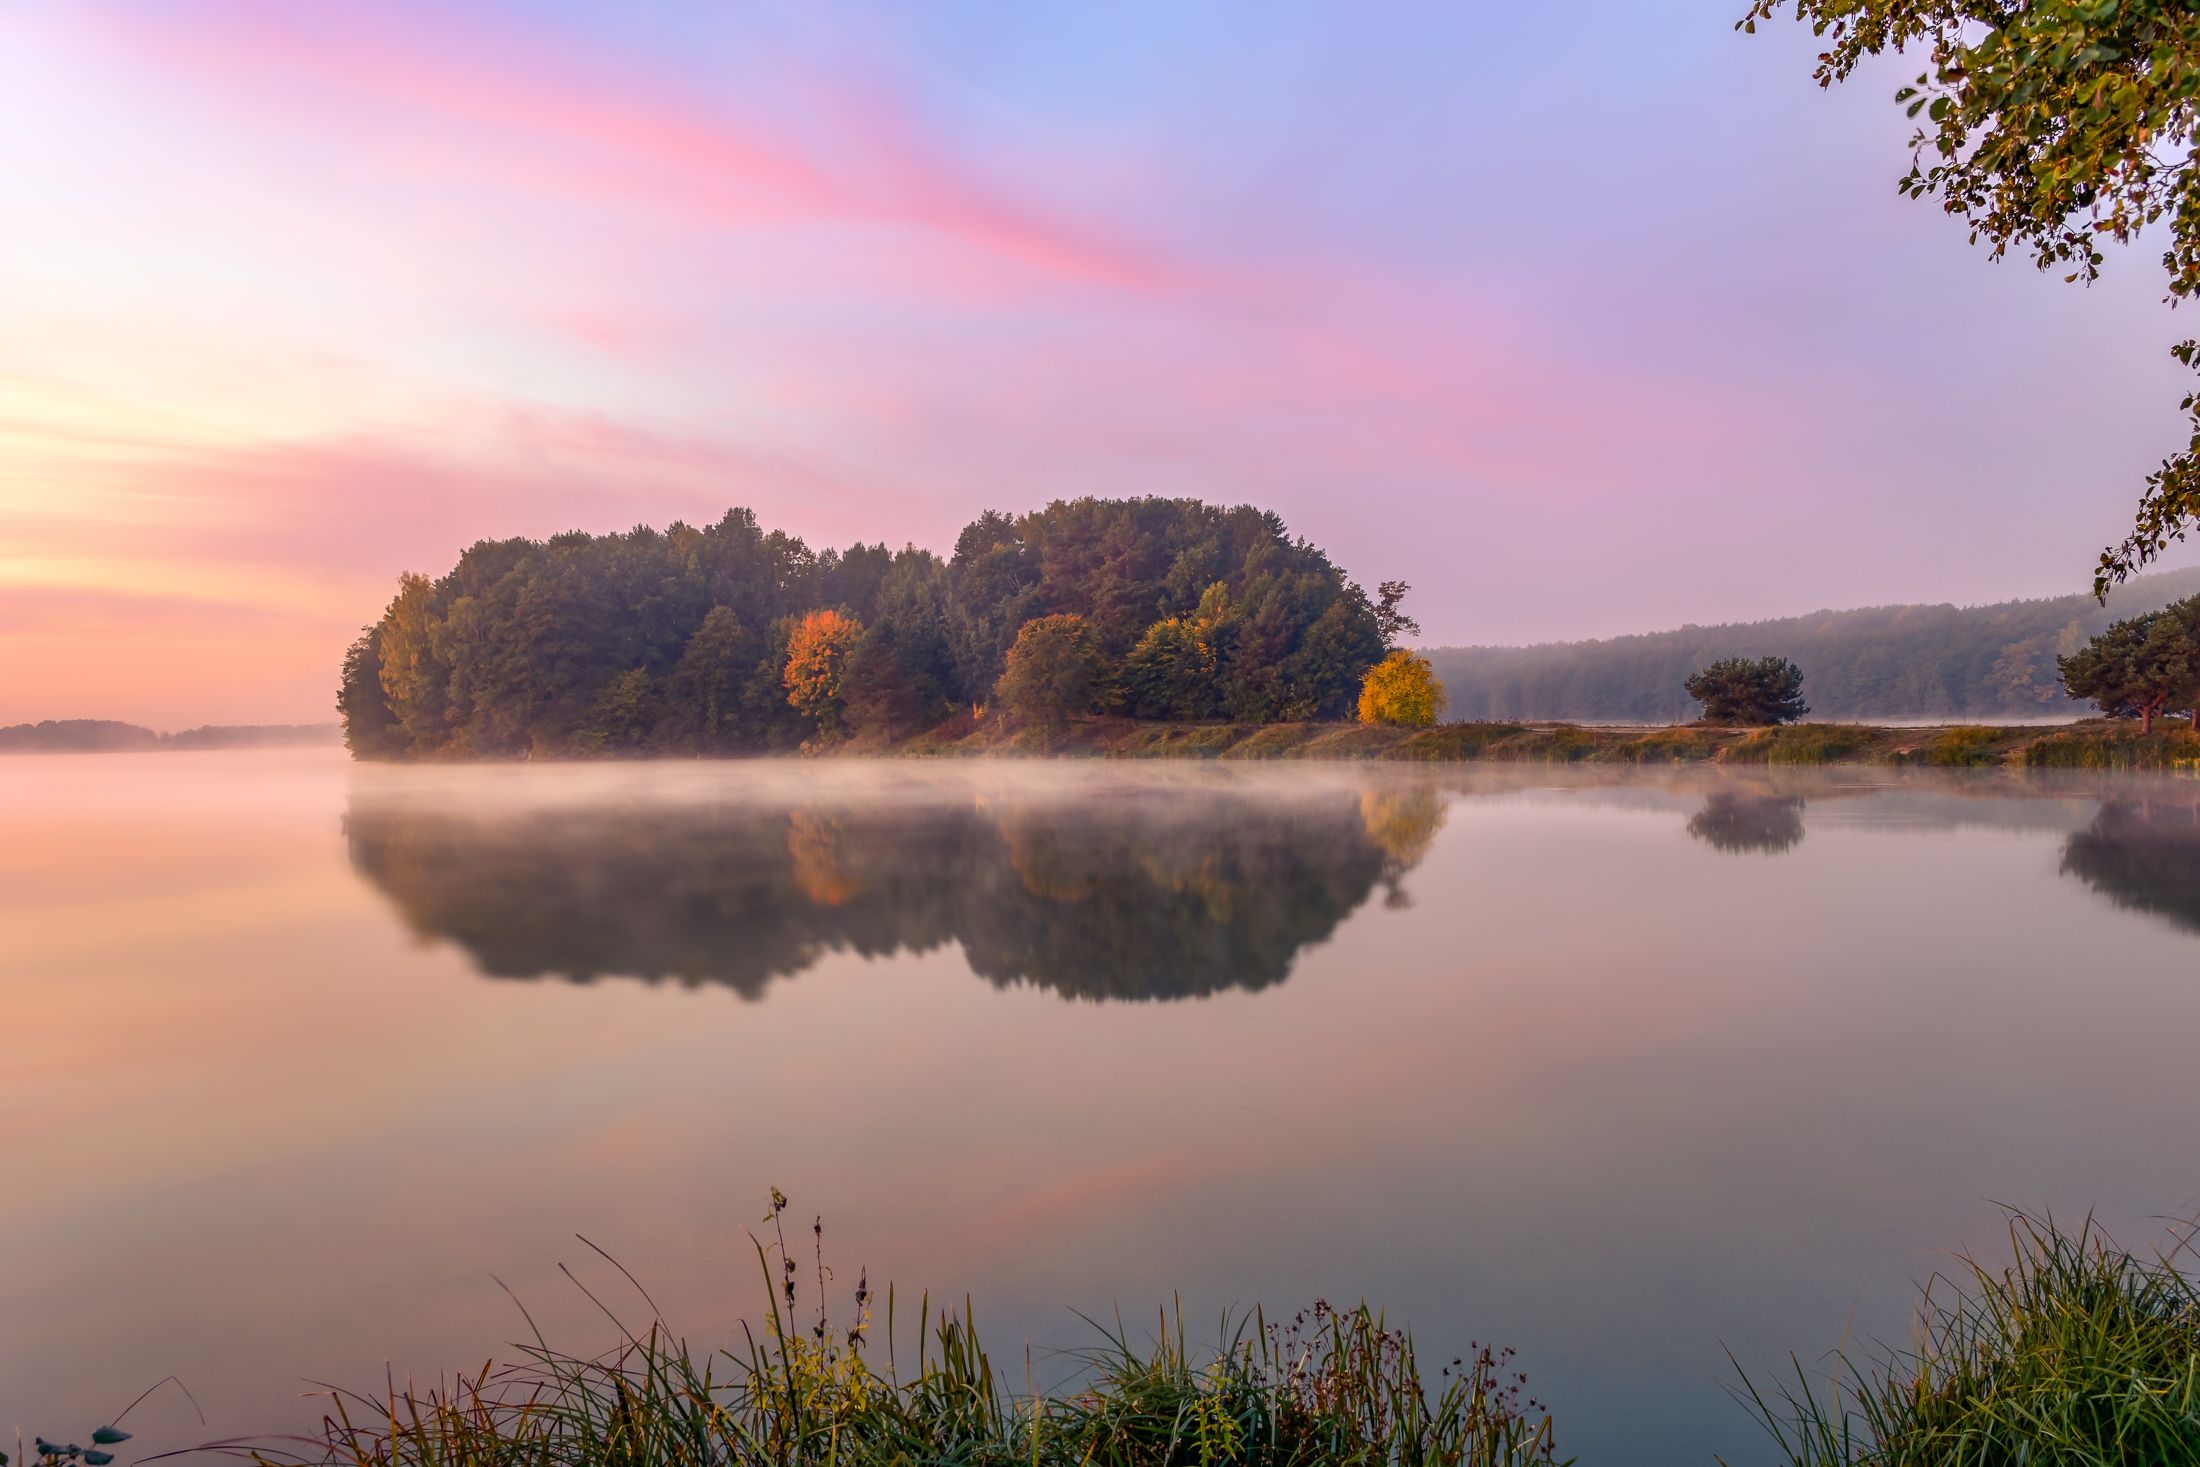 sunrise, landscape, nature, fog, water, reflection in water, sky, clouds, light, dawn, islet, trees,, Krzysztof Tollas